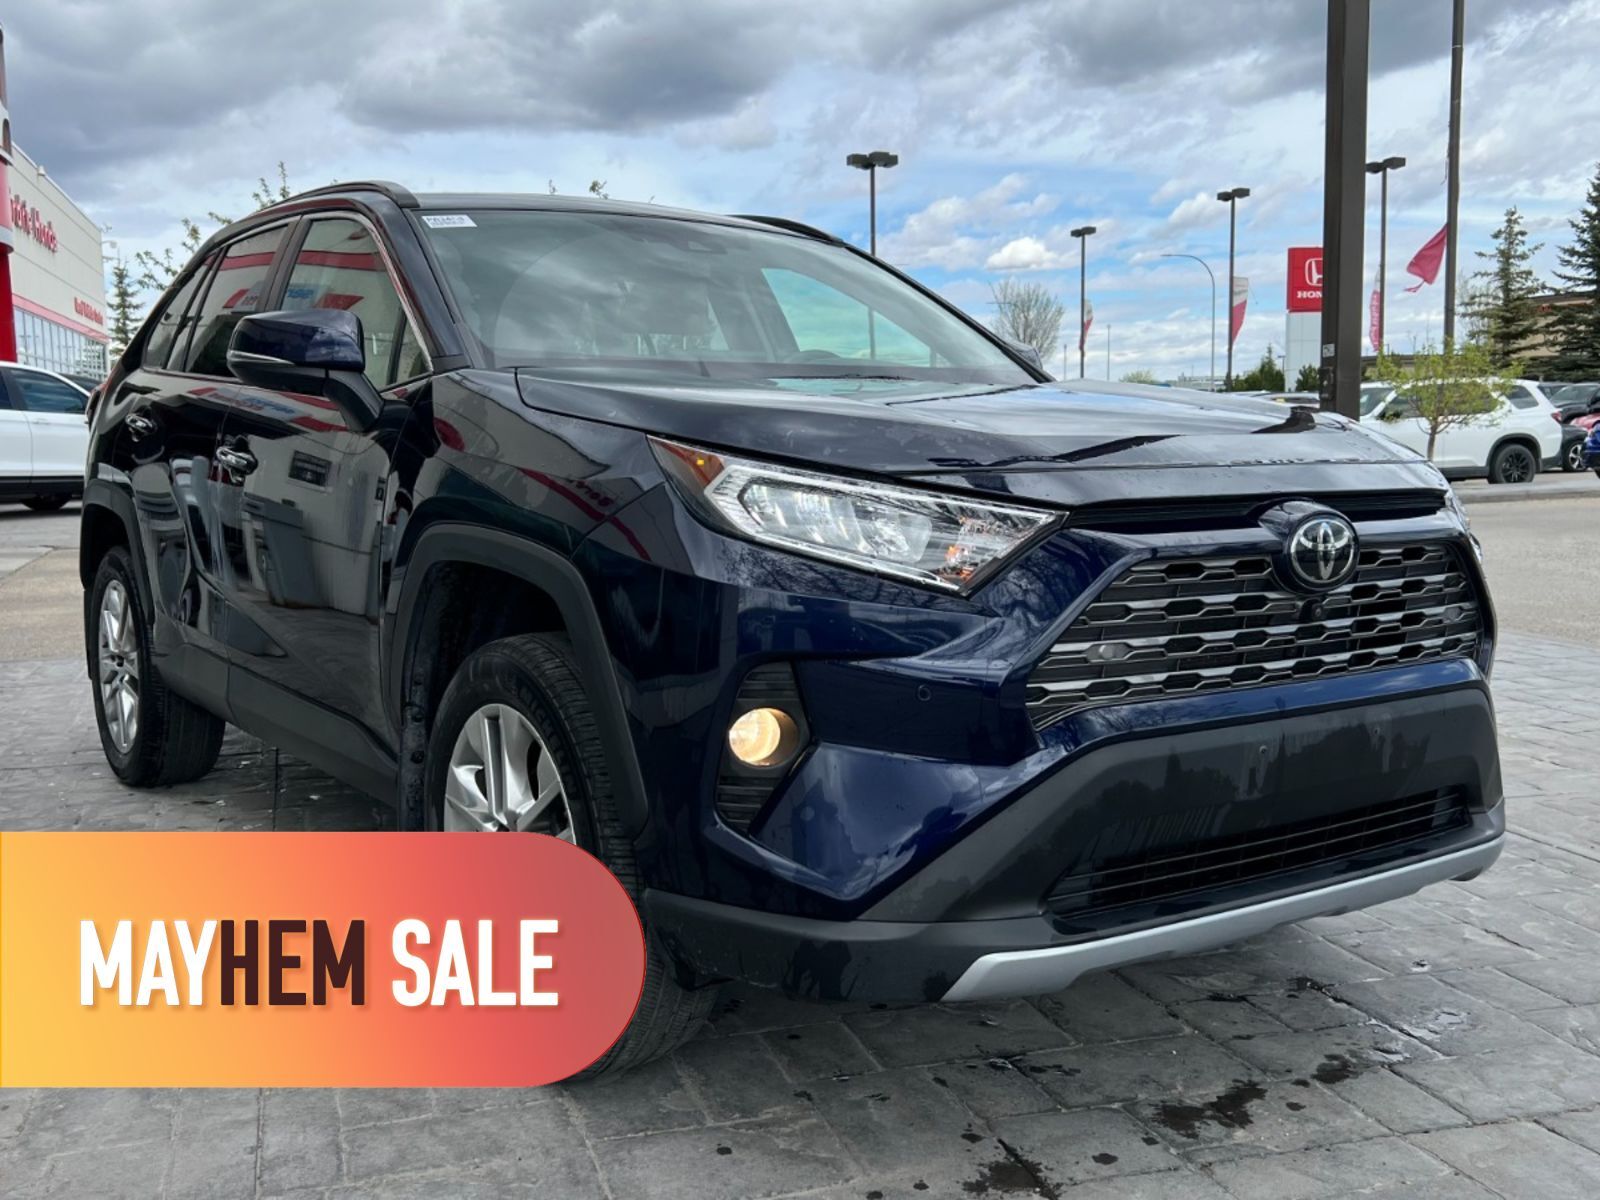 2019 Toyota RAV4 Limited - No Accidents, One Owner, Navigation